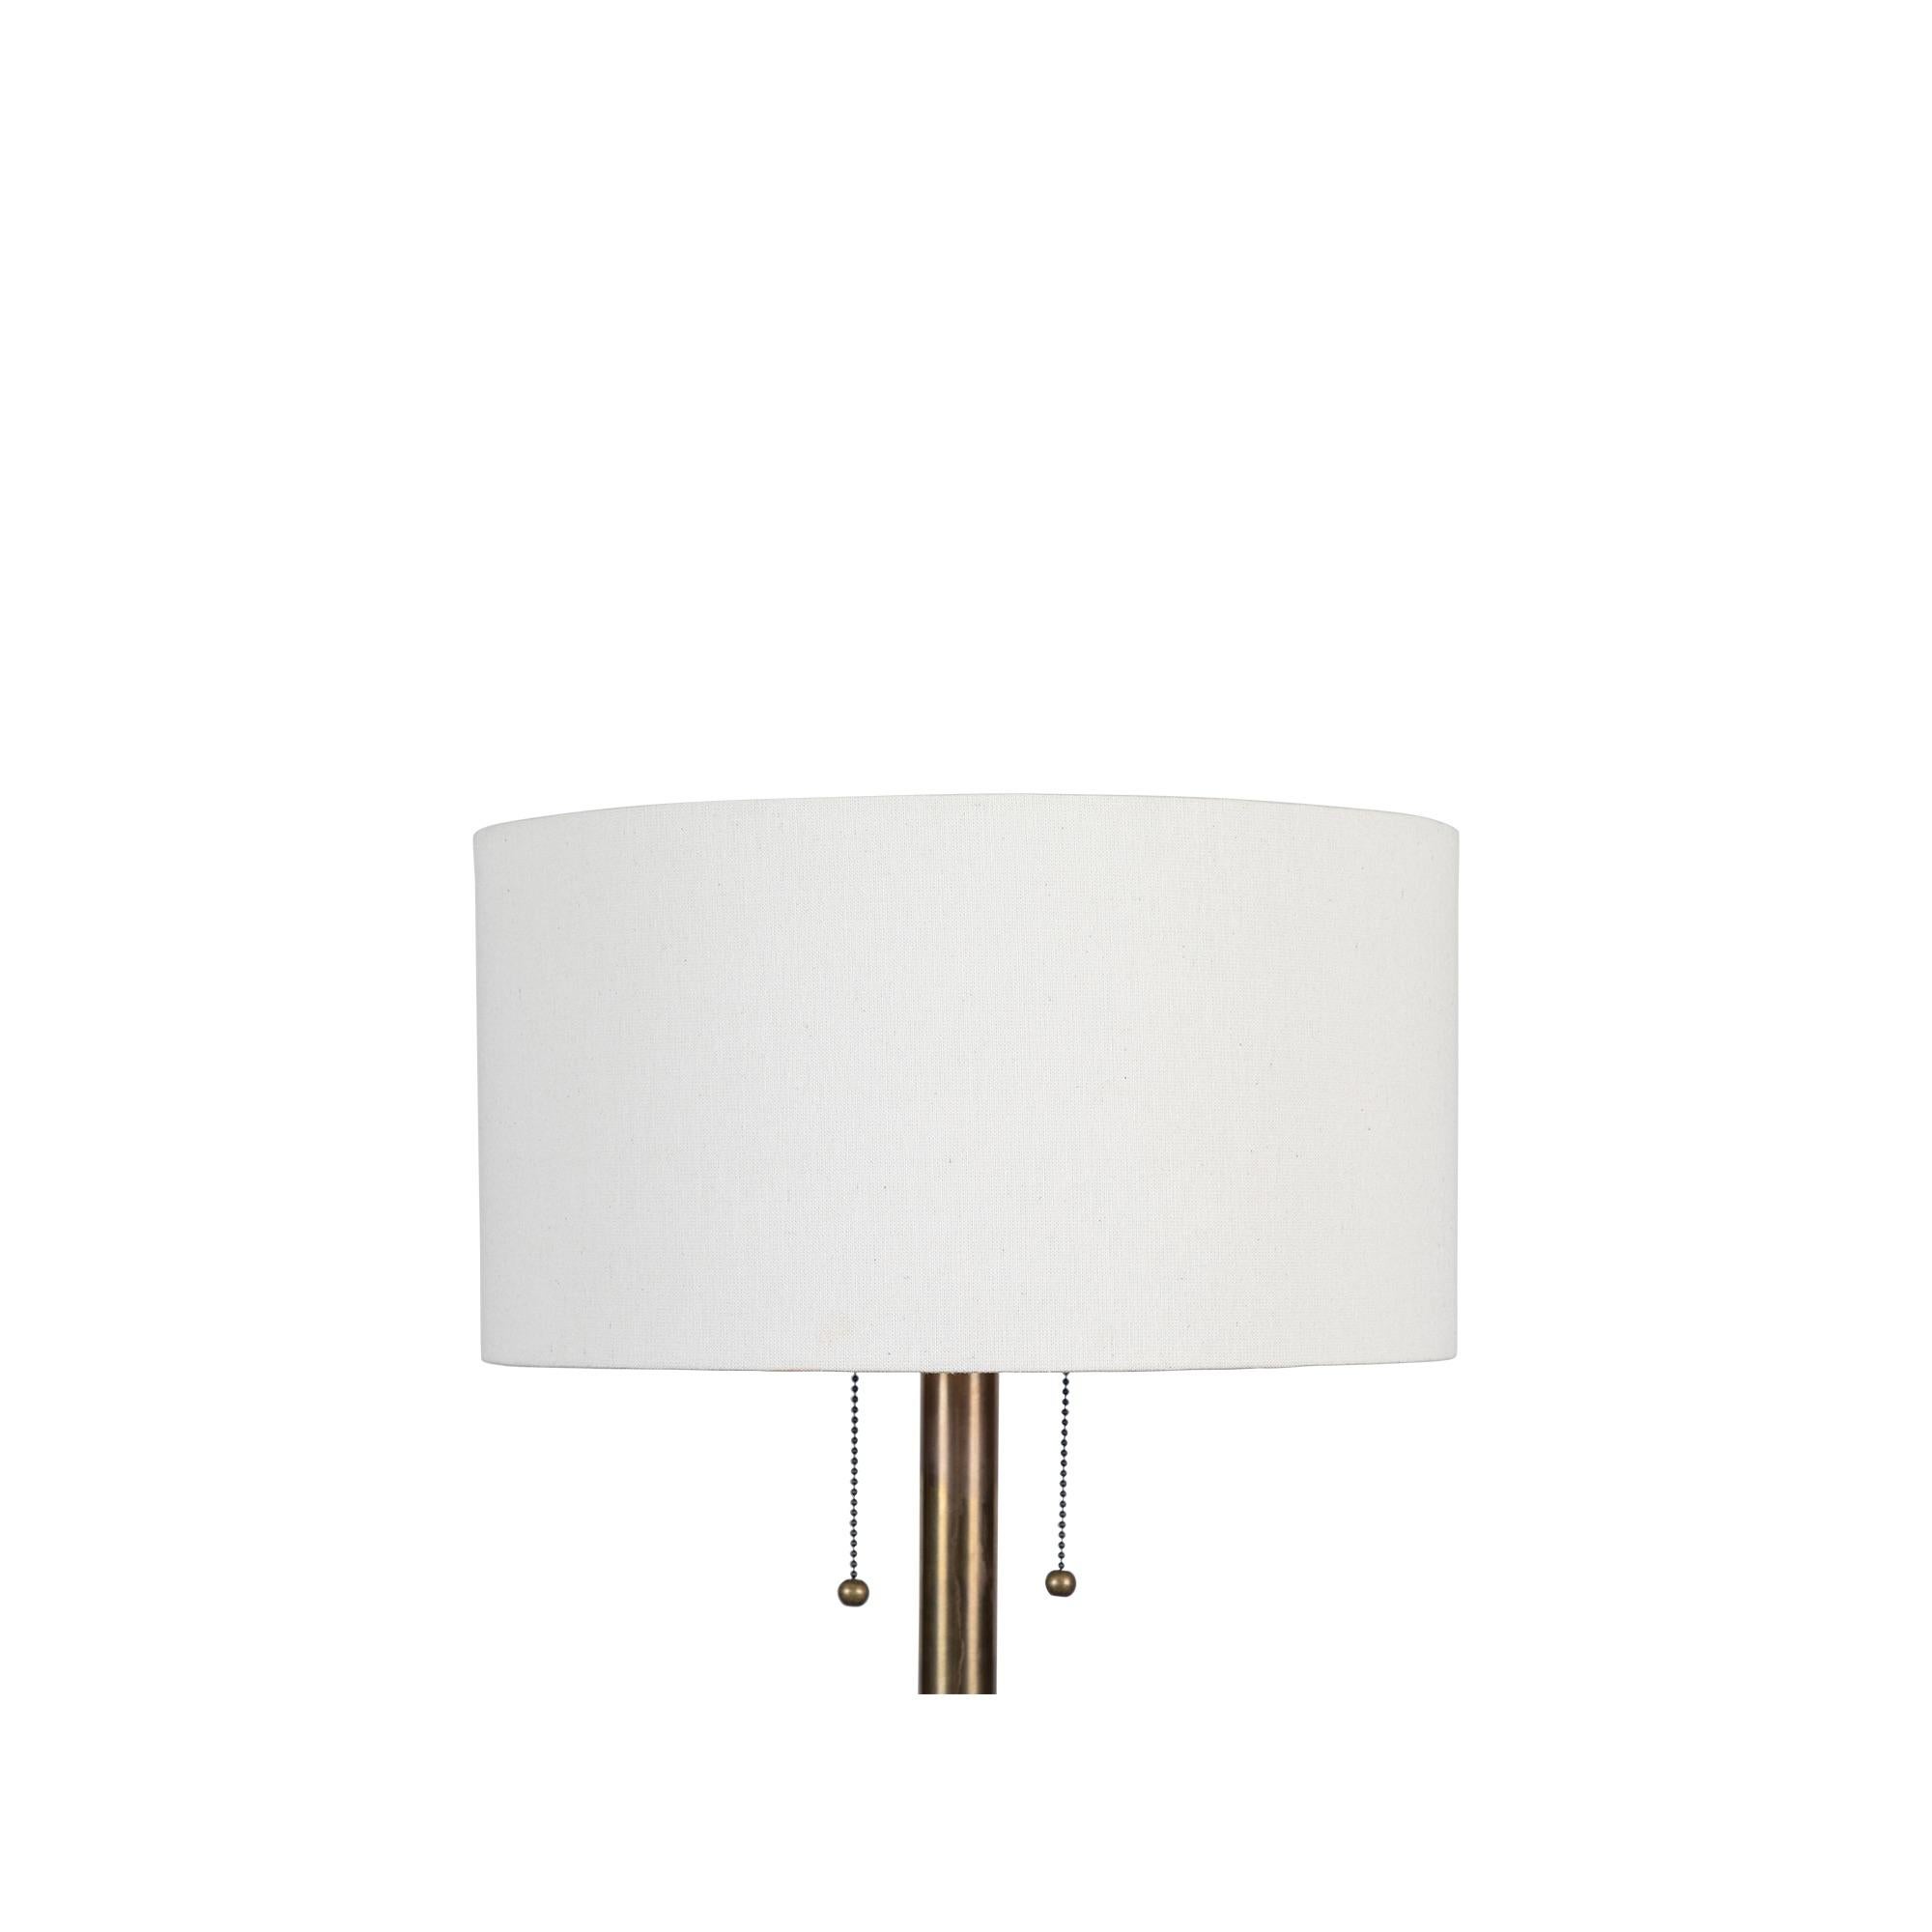 The Paul floor lamp is a solid brass floor lamp with a linen drum shade. The lamp has two separate pull chains so the bulbs can be turned on or off independently and features small, round, brass feet and finial. The cord is wrapped in brown